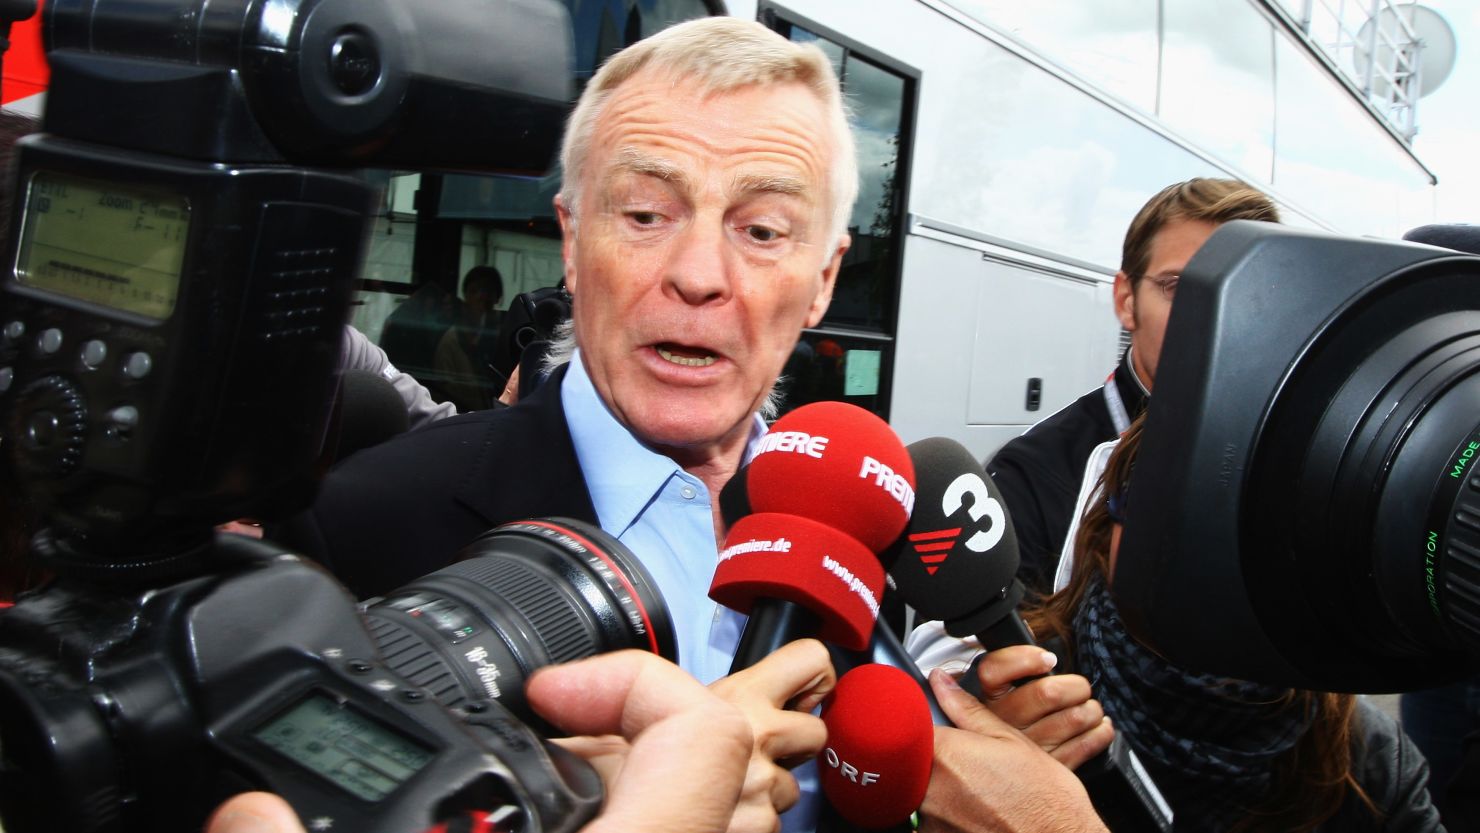 Max Mosley is surrounded by the media during practice for the British F1 Grand Prix at Silverstone, England on June 19, 2009.